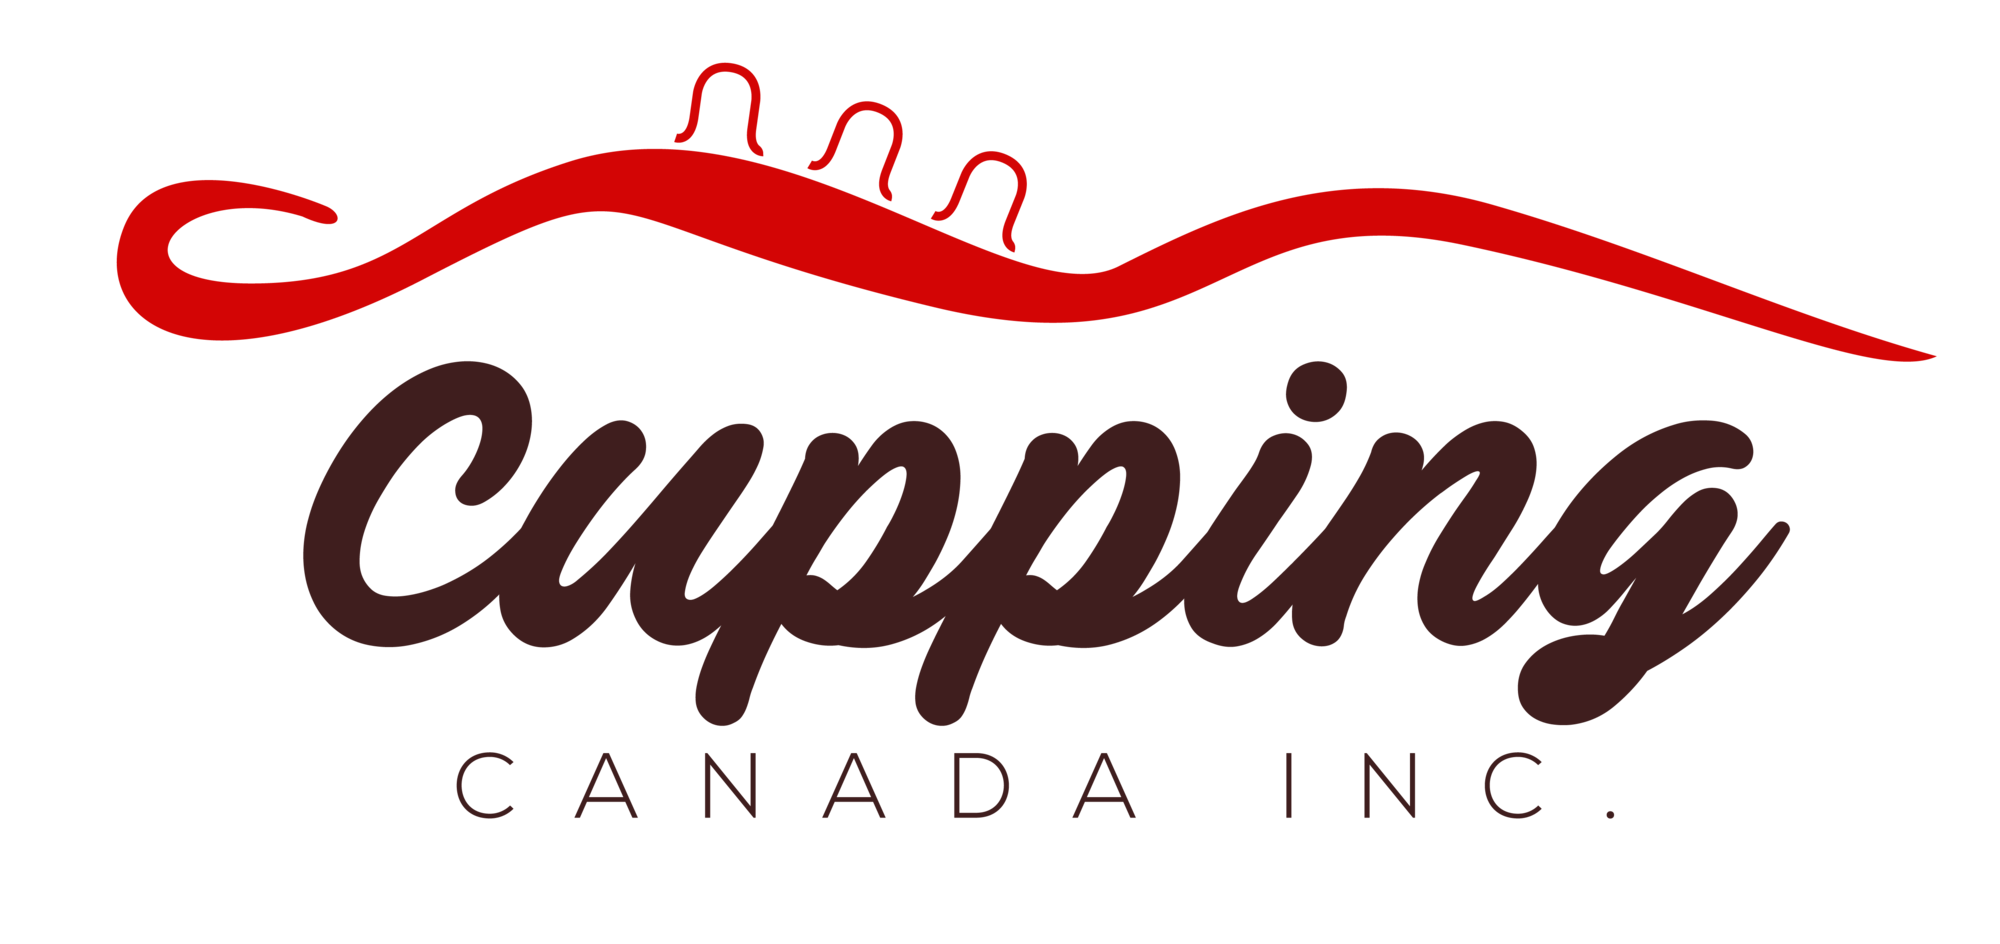 cupping canada logo.png